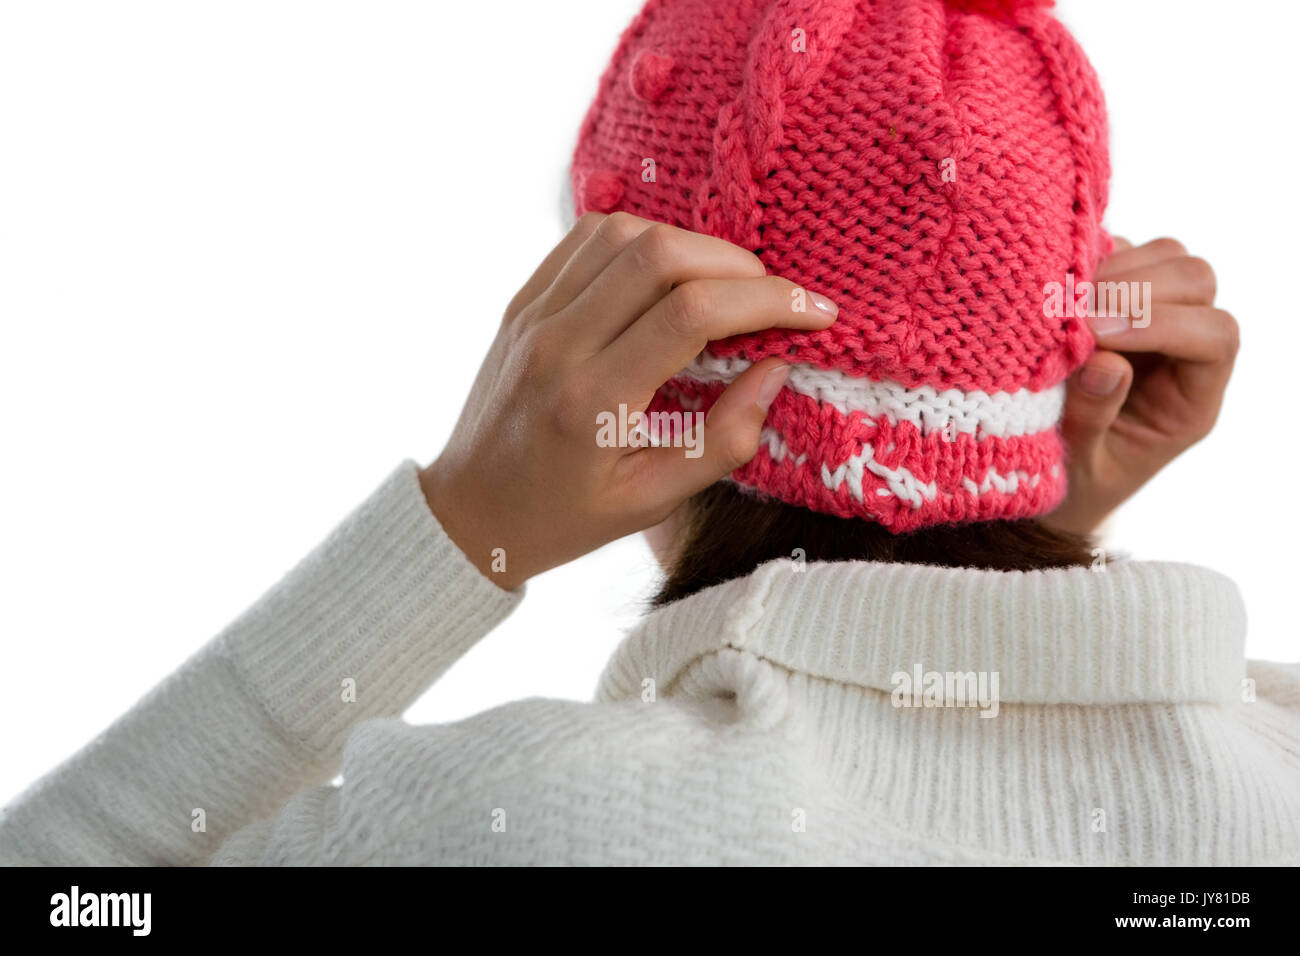 Rear view of woman wearing knit hat against white background Stock Photo